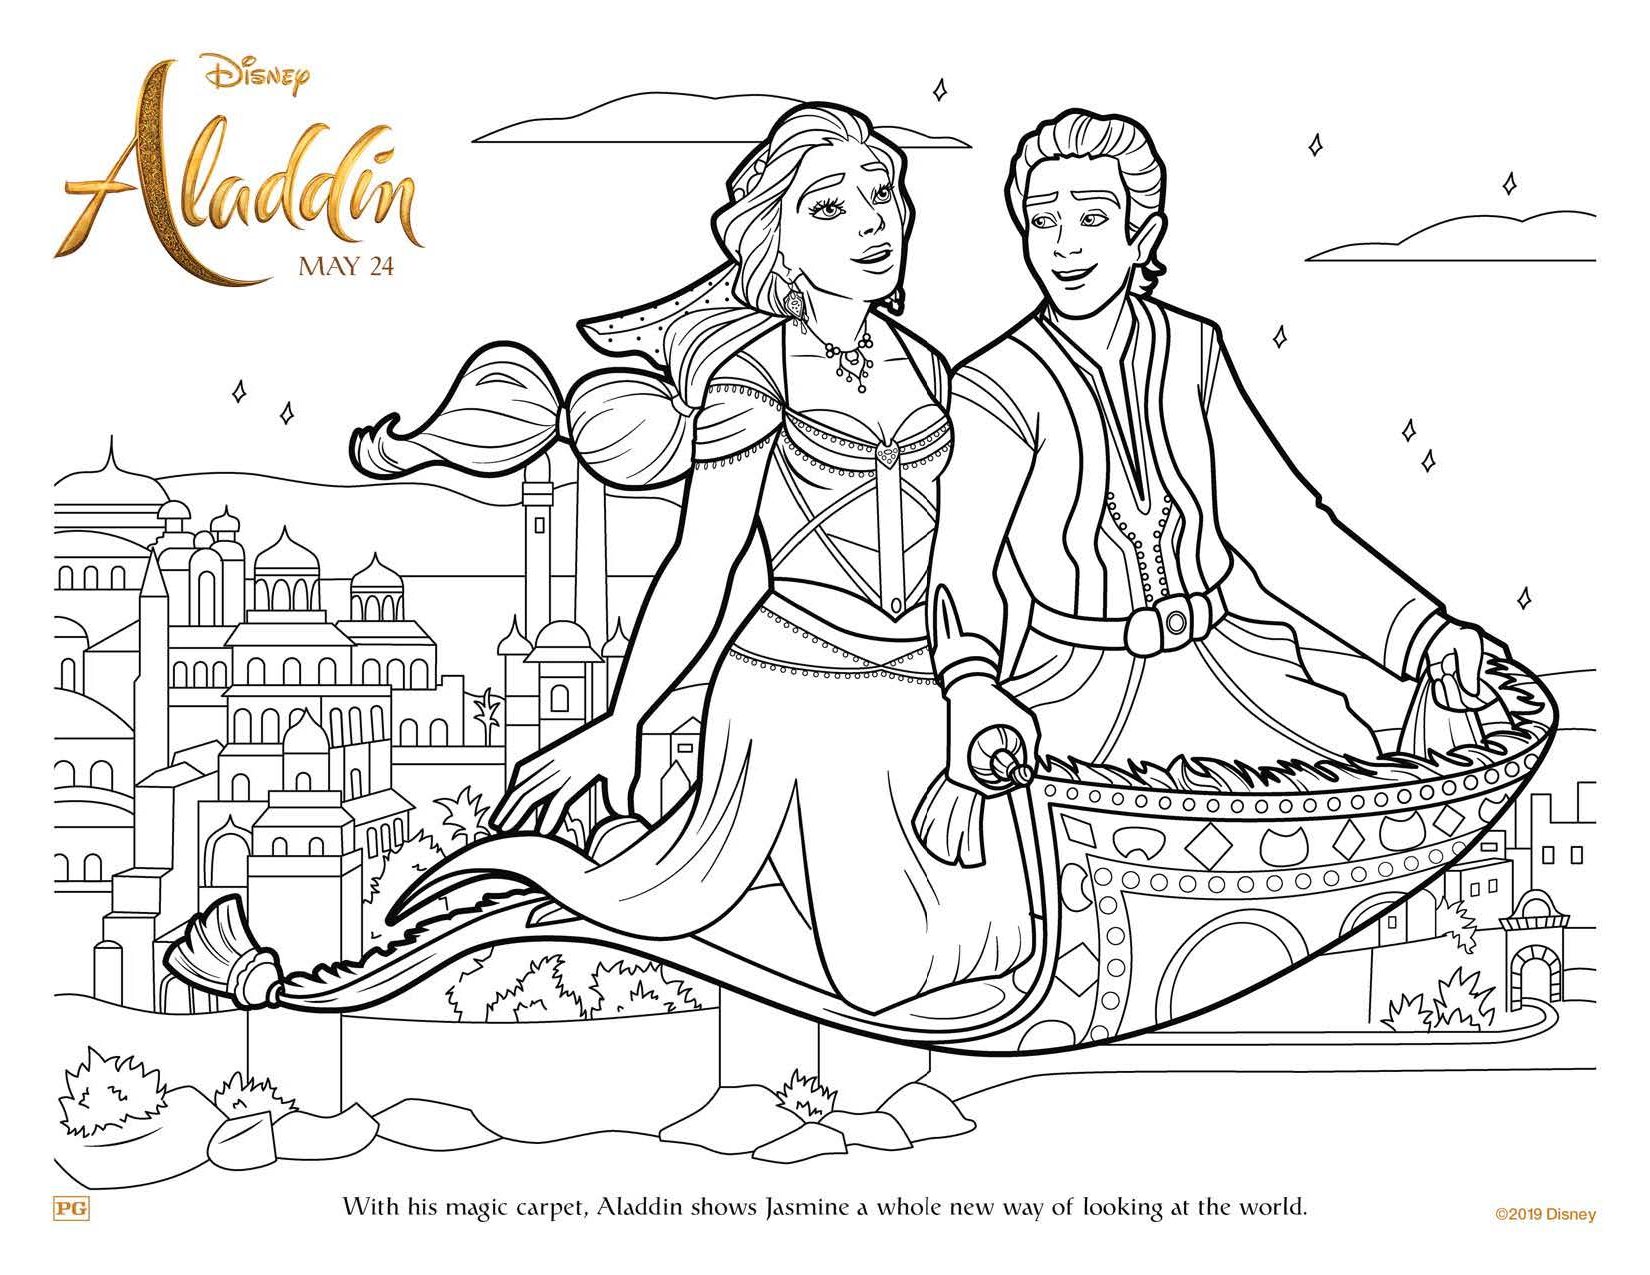 Aladdin Free Coloring Sheets to print from home from Disney